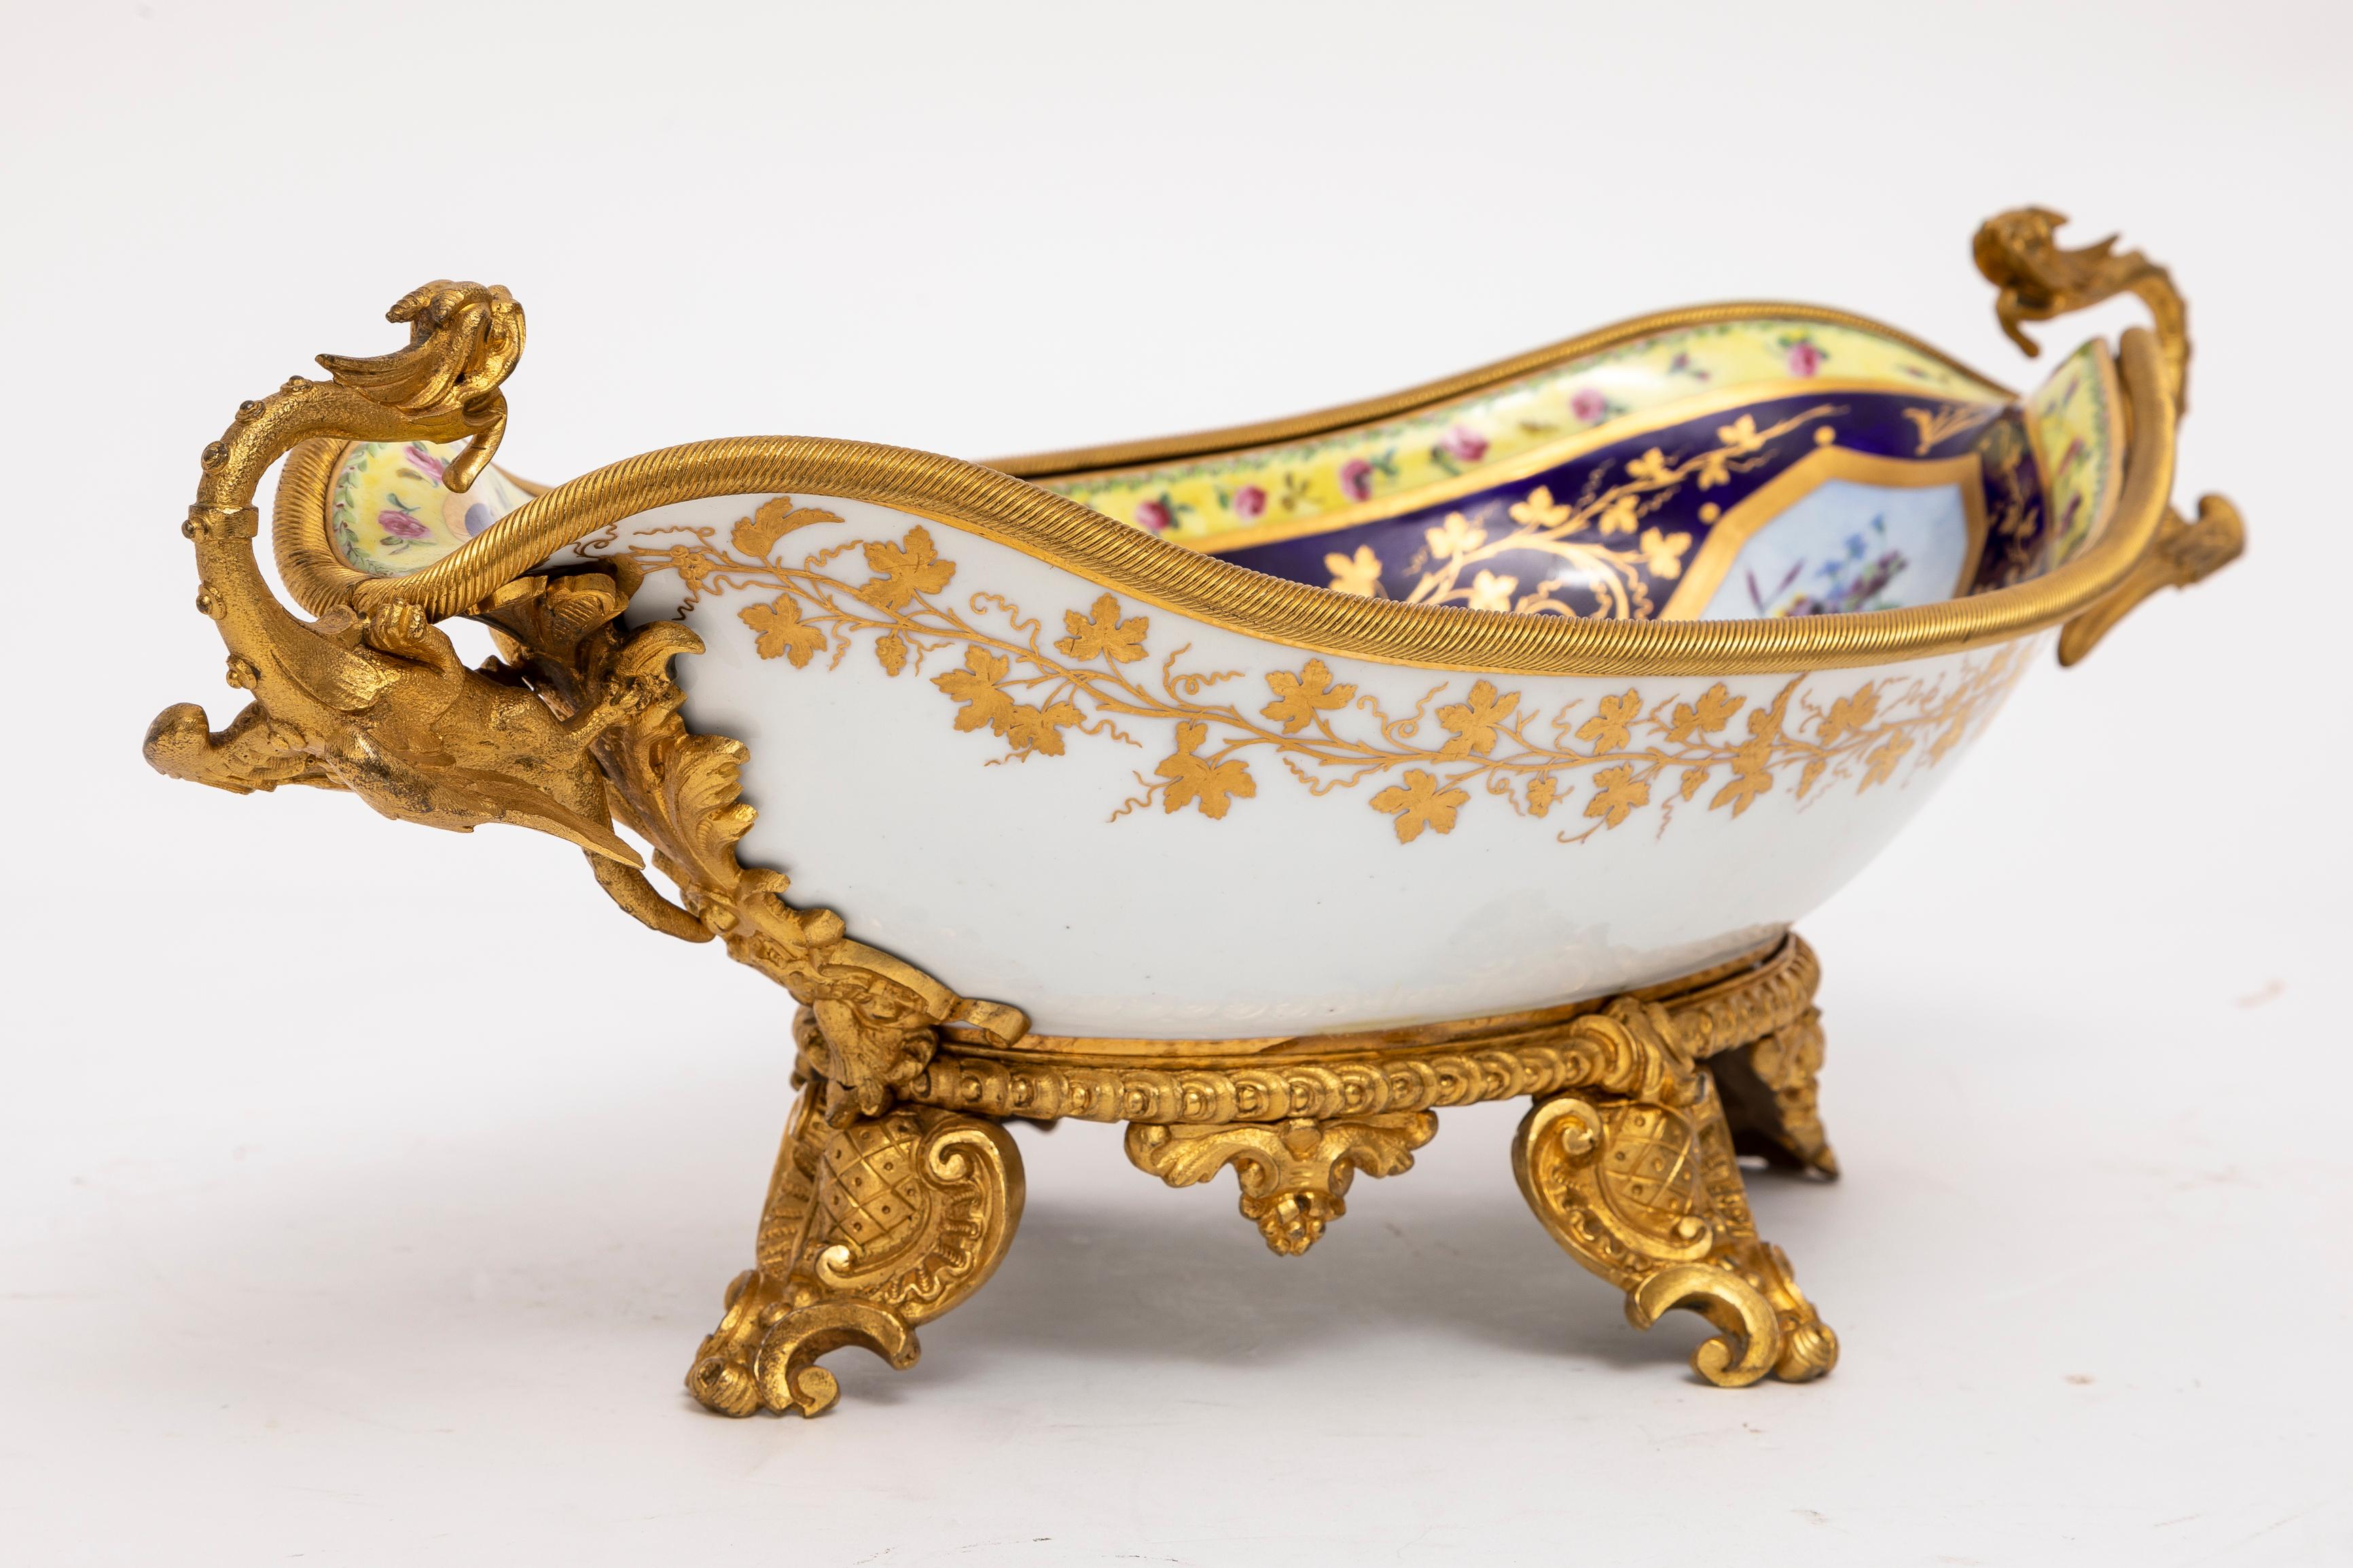 Late 18th Century An 18th C. French Ormolu Mounted Sevres Porcelain Centerpiece w/ Dragon Handles For Sale